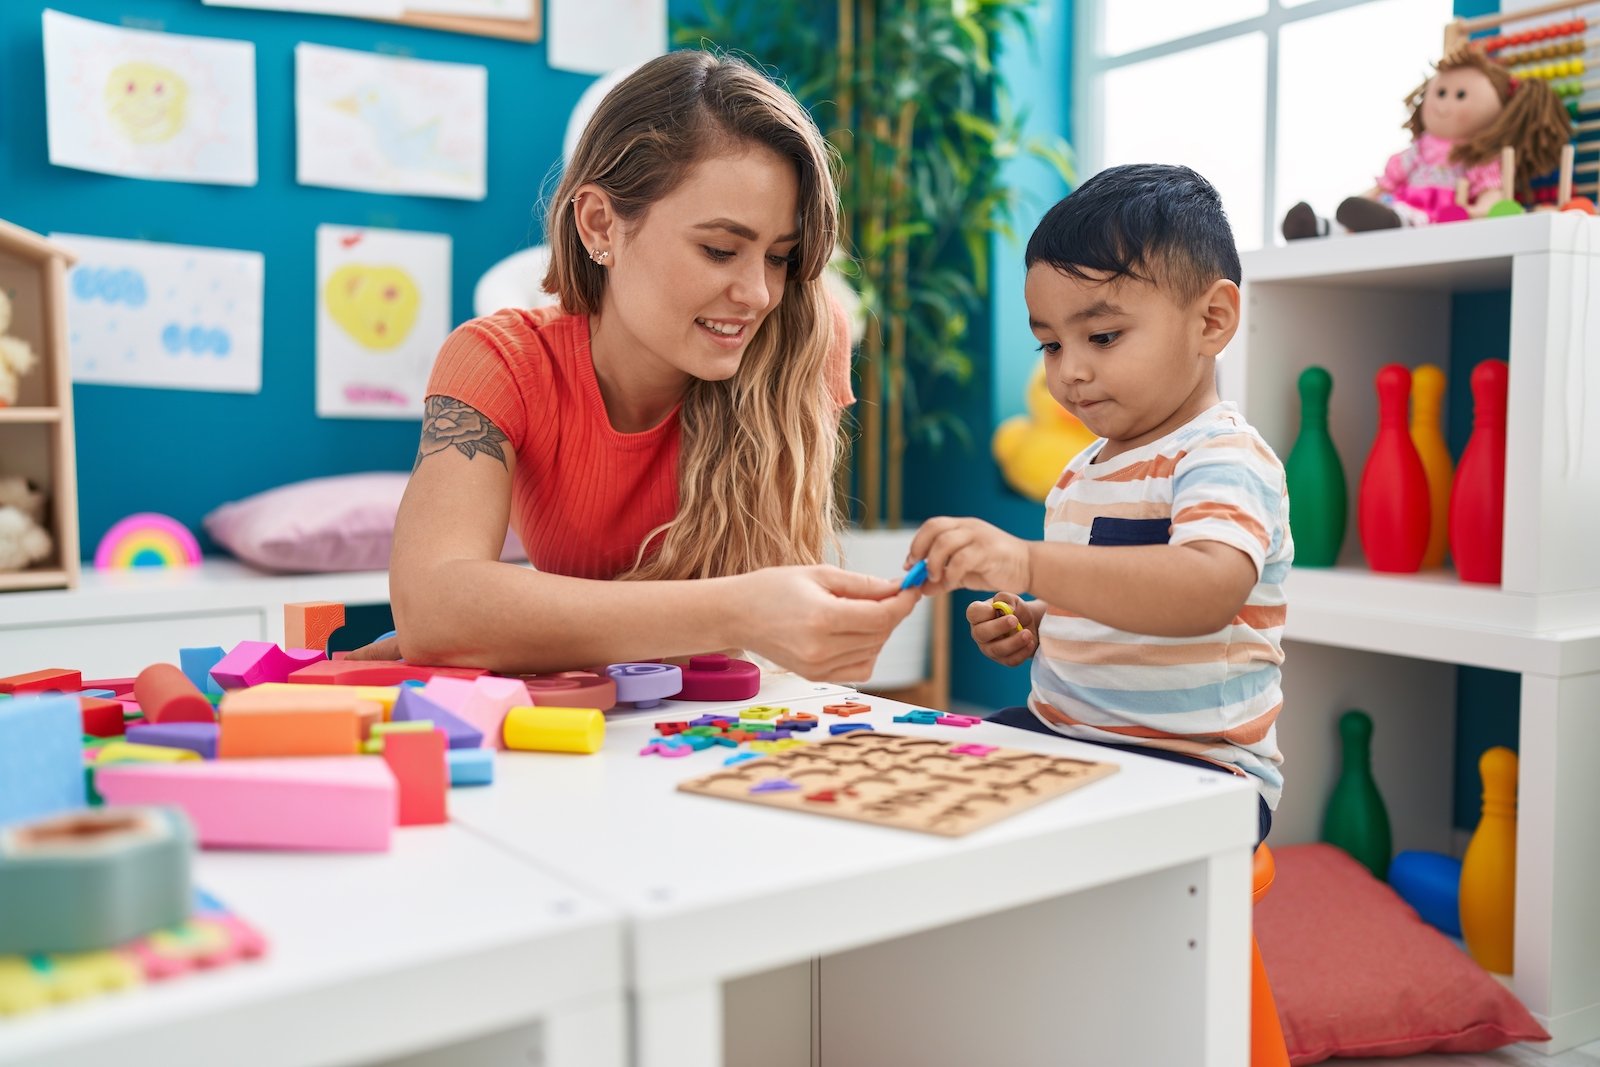 <p>If you are a parent or planning to become one, figuring out childcare is likely at the top of your list. It is no secret that in the U.S., childcare does not come cheap. Depending on where you live, the cost can take a significant chunk out of your budget. We have used the Miami Herald’s <a href="https://www.miamiherald.com/news/business/article289658109.html" rel="noopener">survey</a> and rankings to identify 15 states with the highest childcare costs.</p>